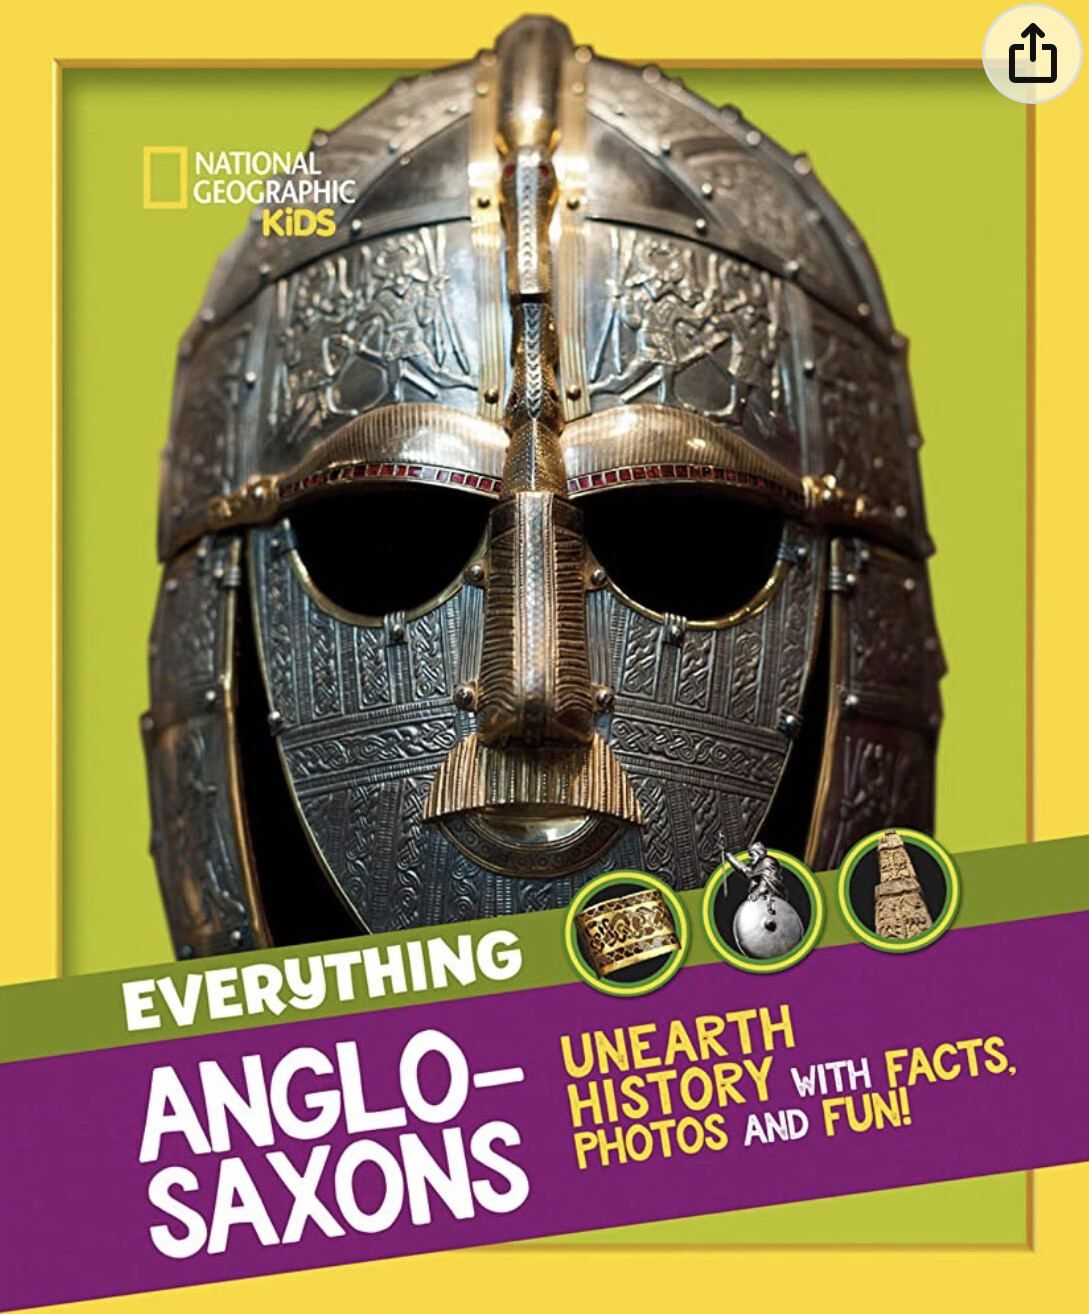 National Geographic Kids. Everything Anglo-Saxons